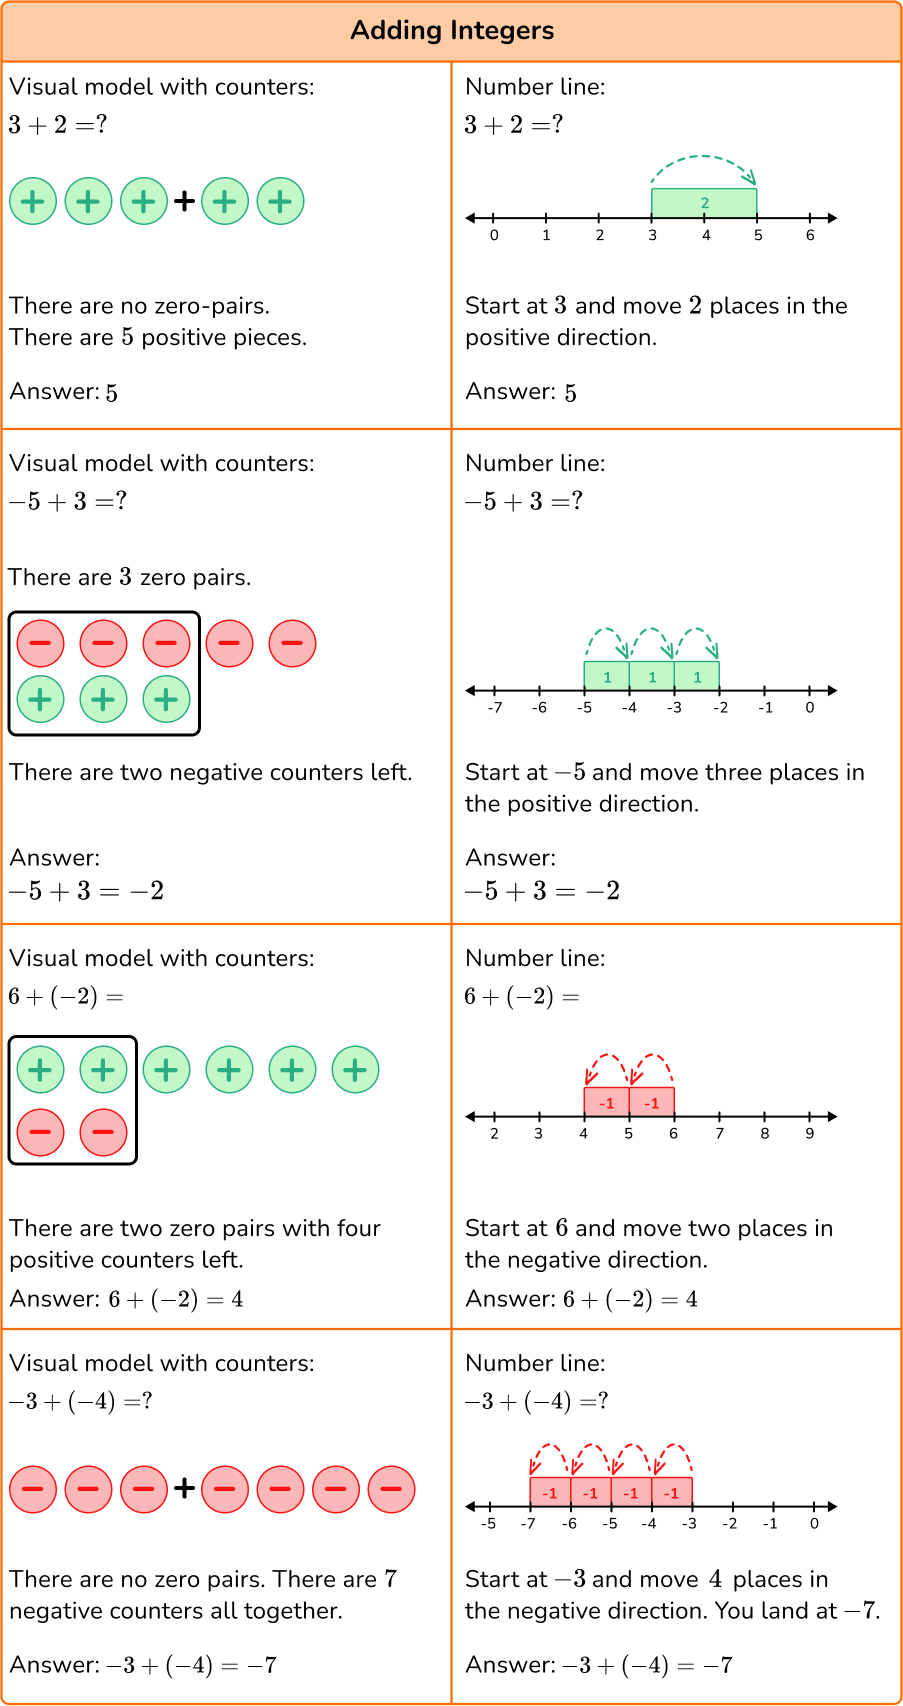 Adding and Subtracting Integers image 1.1